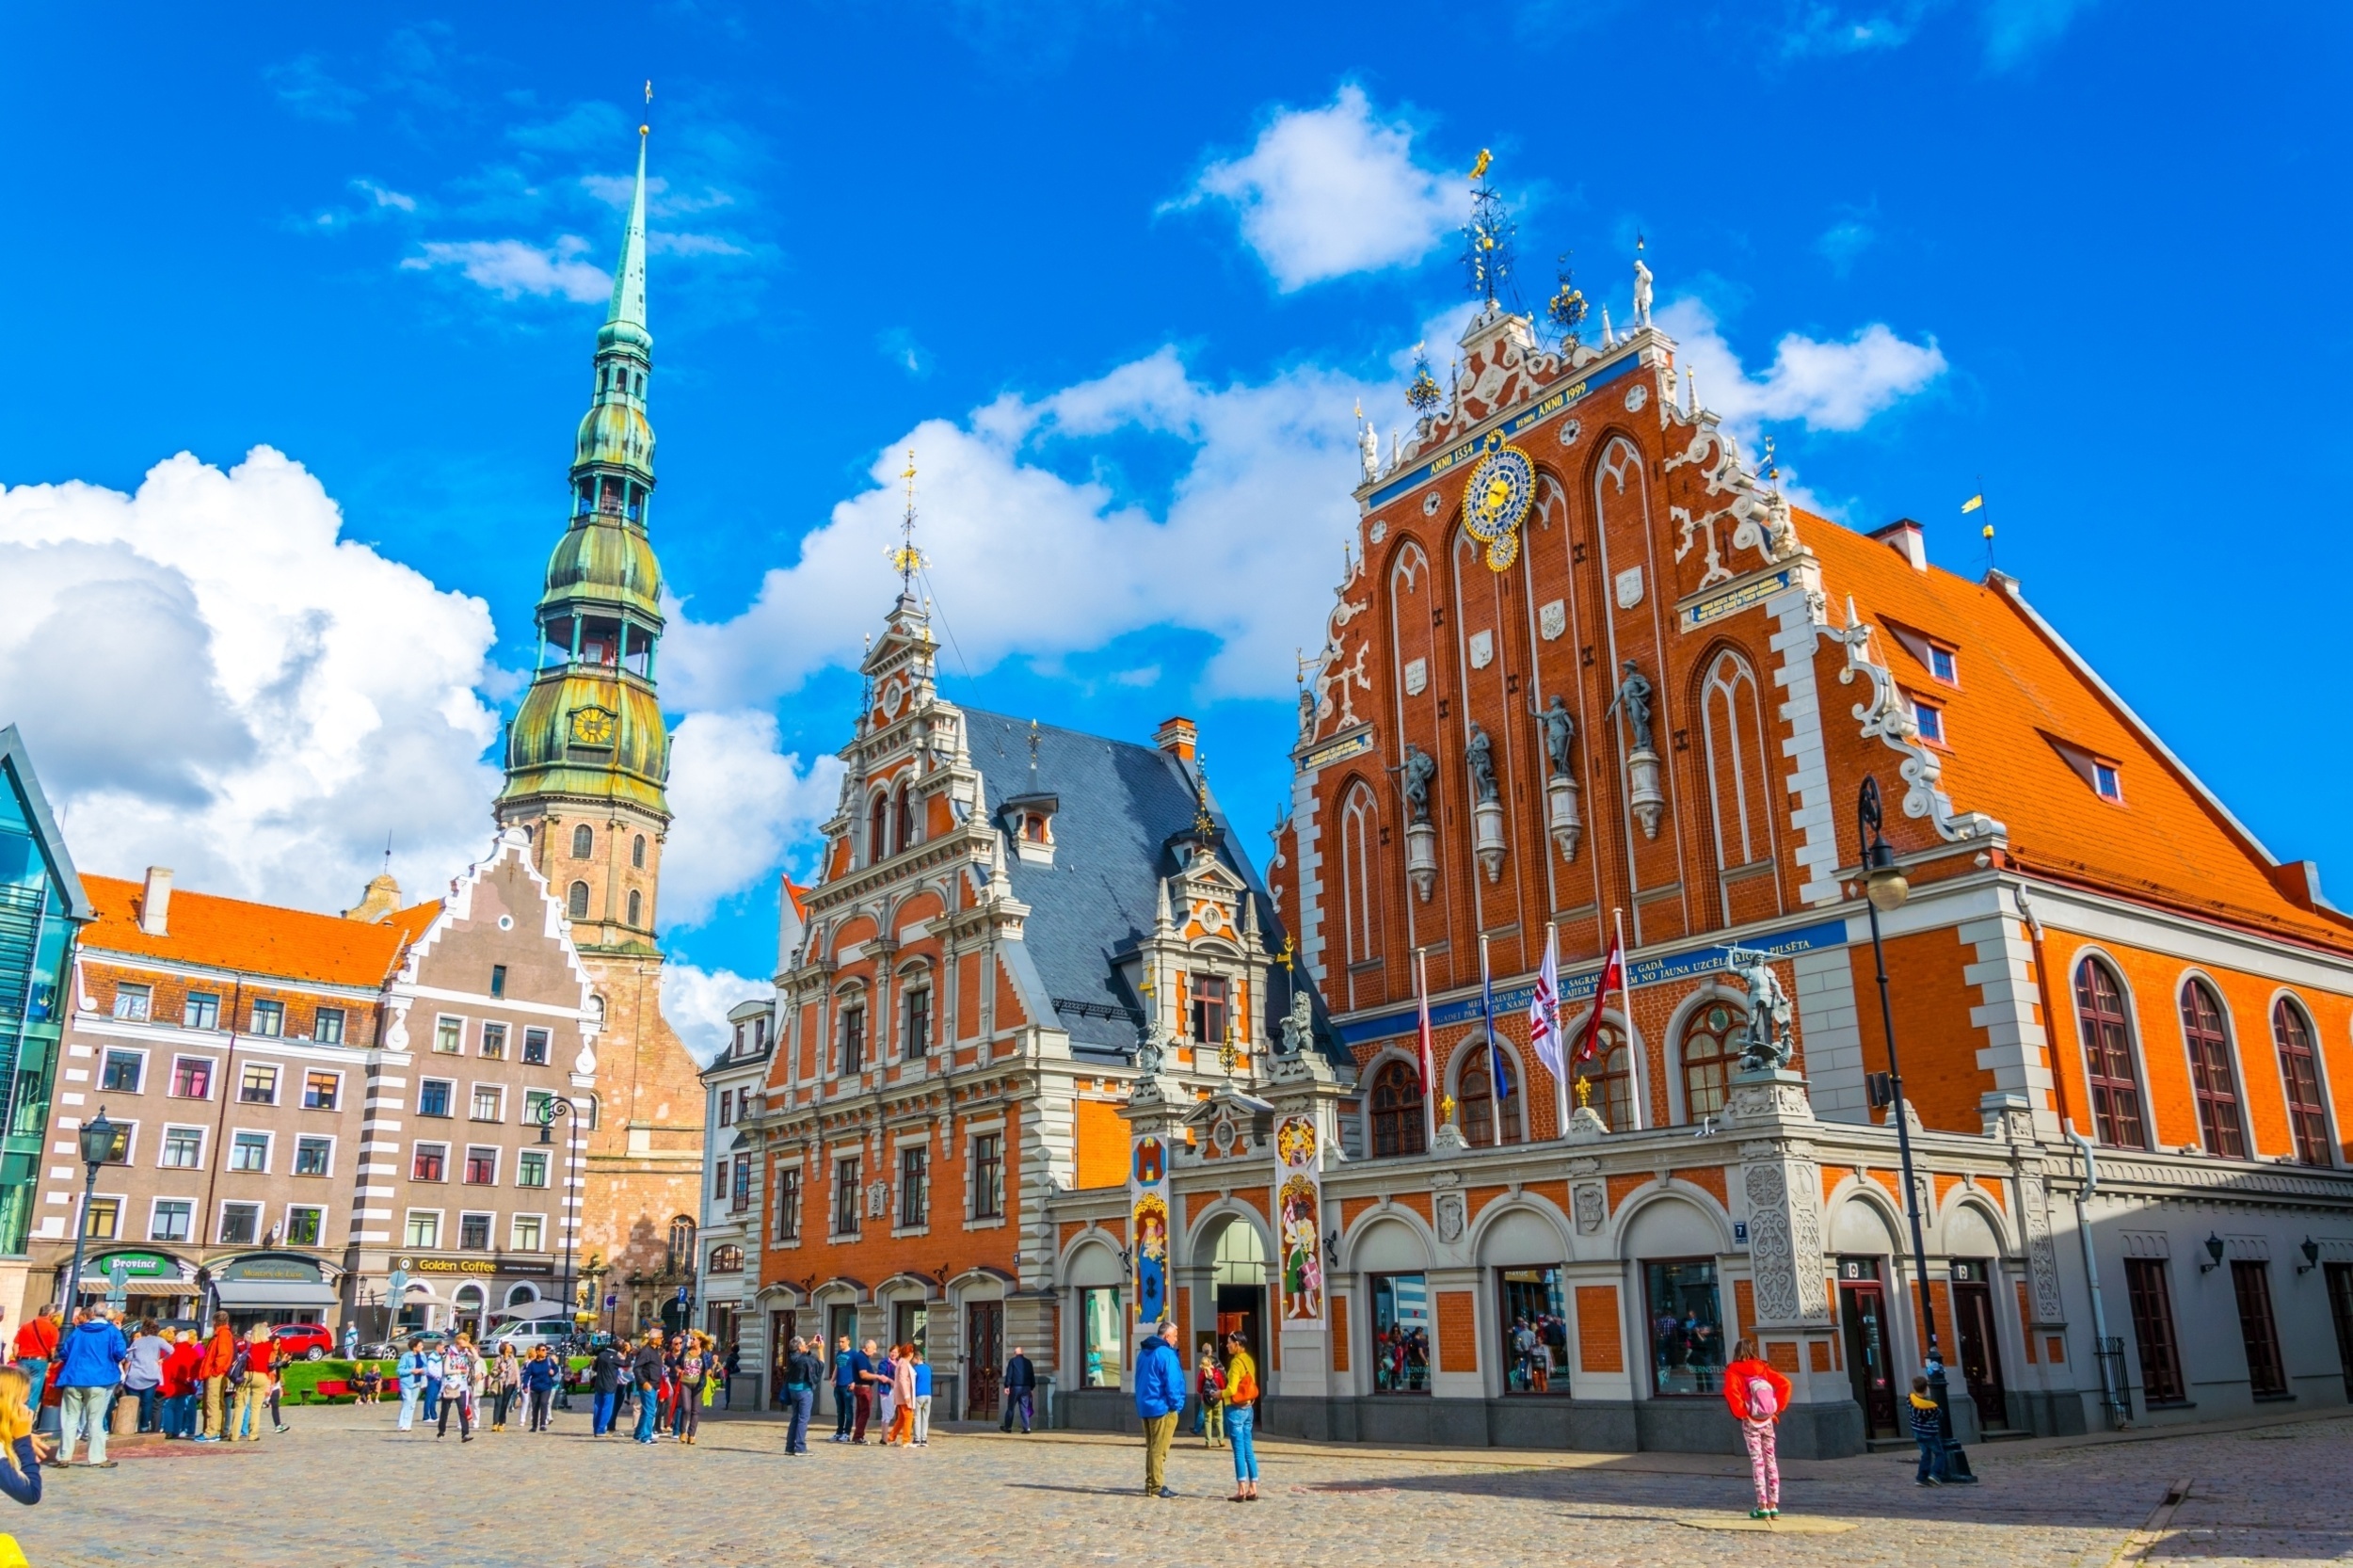 <p>The gorgeous Daugava River runs through the beautiful colored buildings of Riga, inviting you to amble for hours. And as a lesser-known destination, you want to be rubbing elbows with hordes of other American tourists, making for a much more enjoyable trip.</p><p><a href='https://www.msn.com/en-us/community/channel/vid-cj9pqbr0vn9in2b6ddcd8sfgpfq6x6utp44fssrv6mc2gtybw0us'>Follow us on MSN to see more of our exclusive lifestyle content.</a></p>